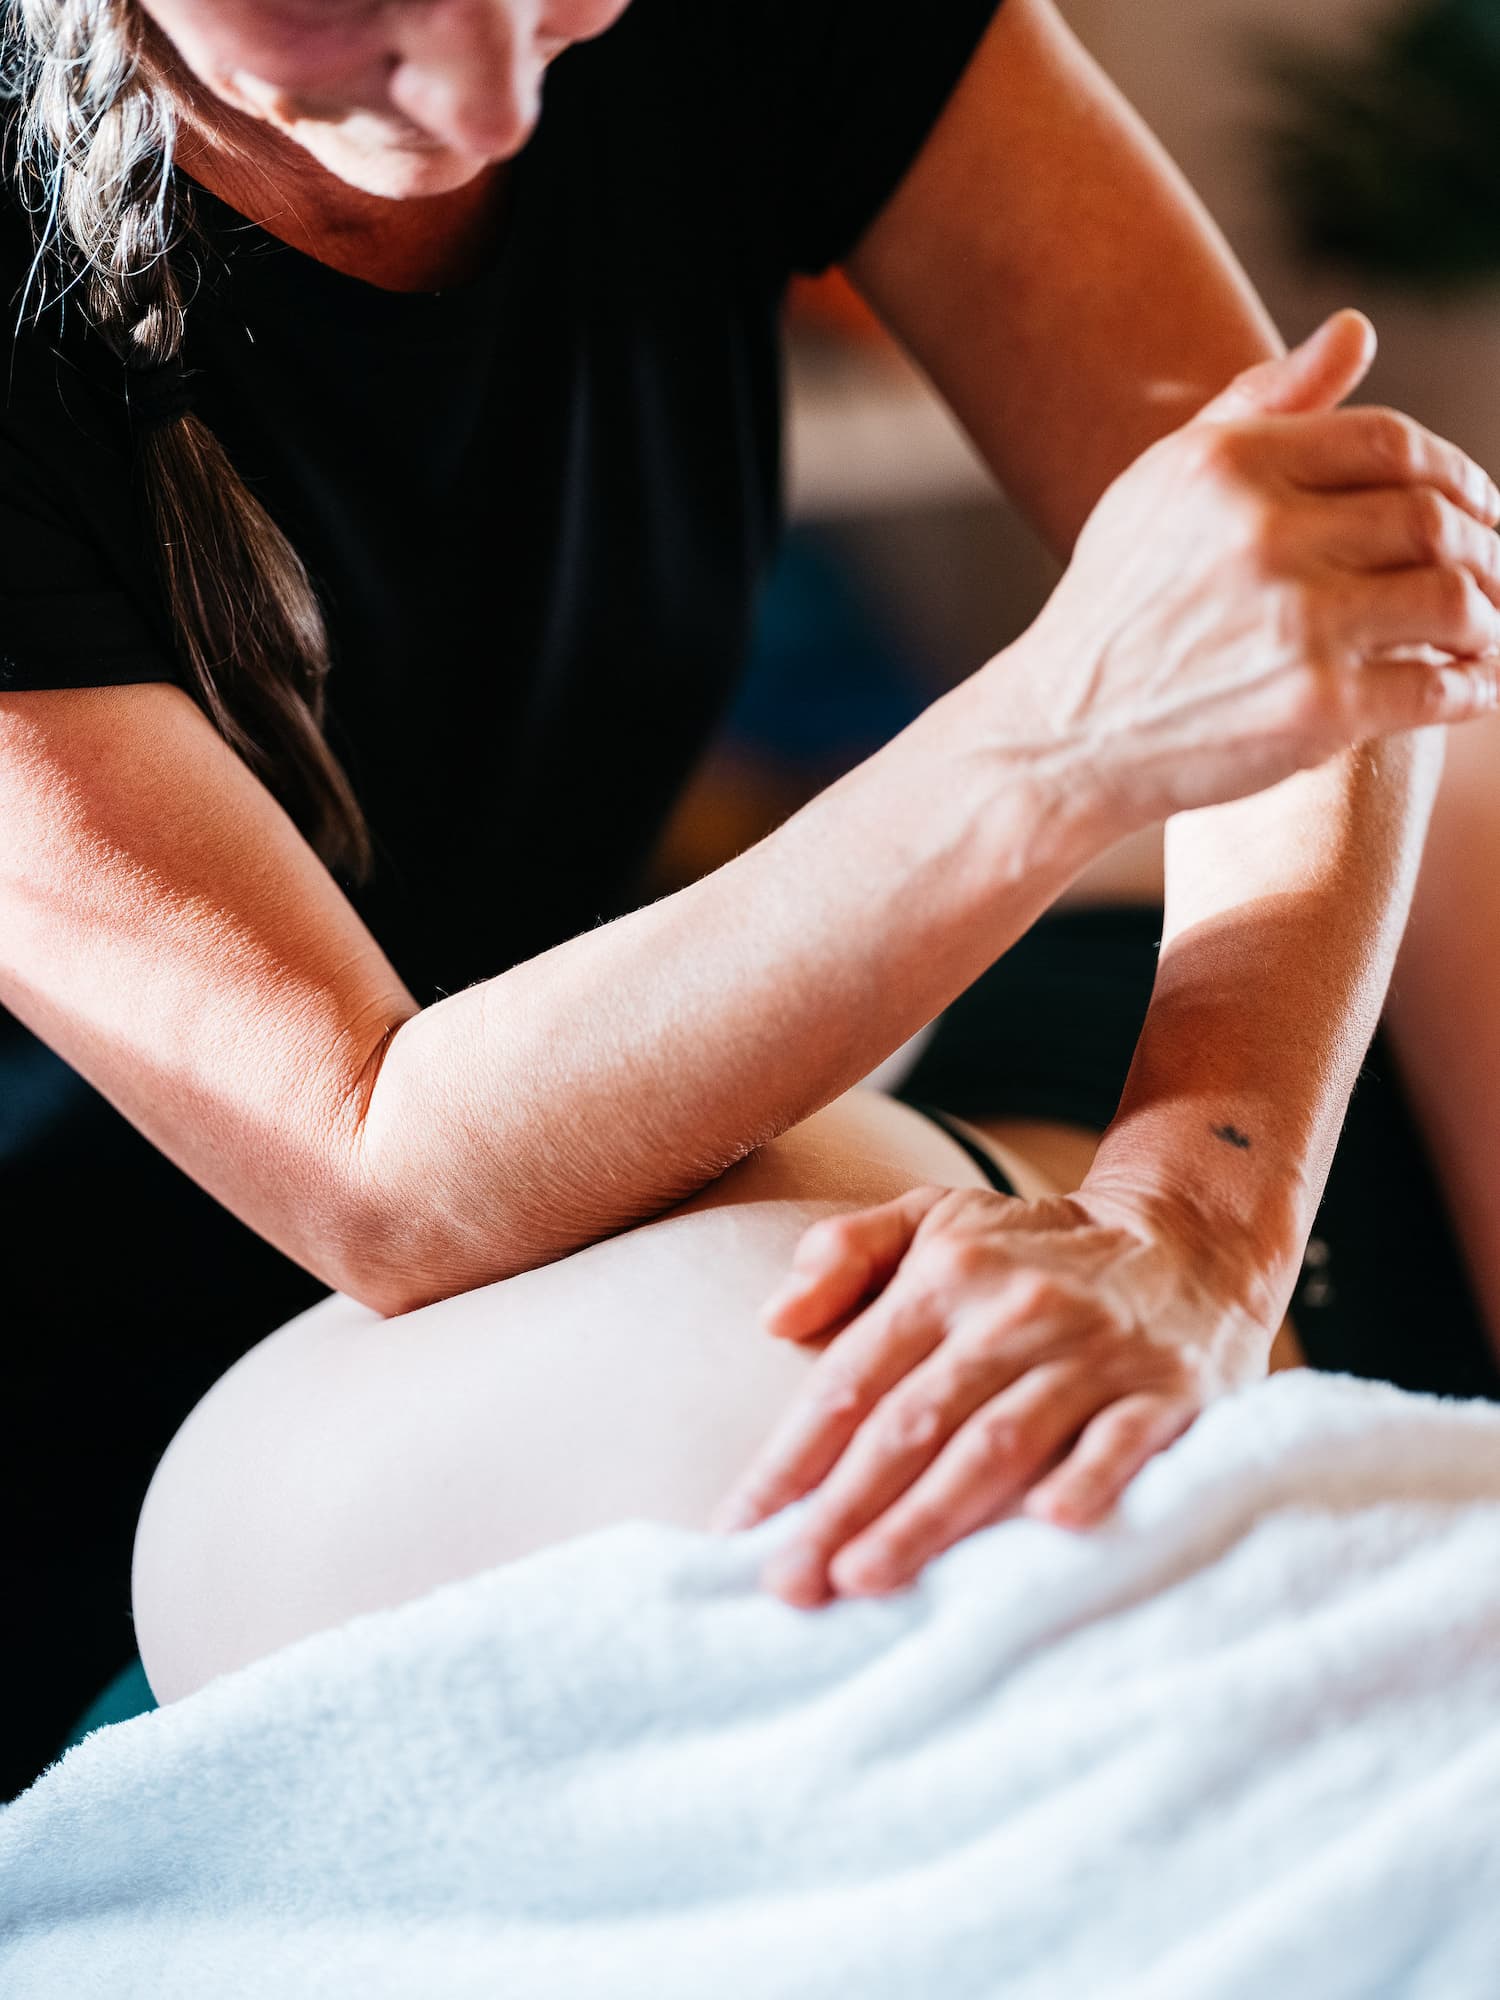 A massage therapist uses her elbow in the hip of a client.